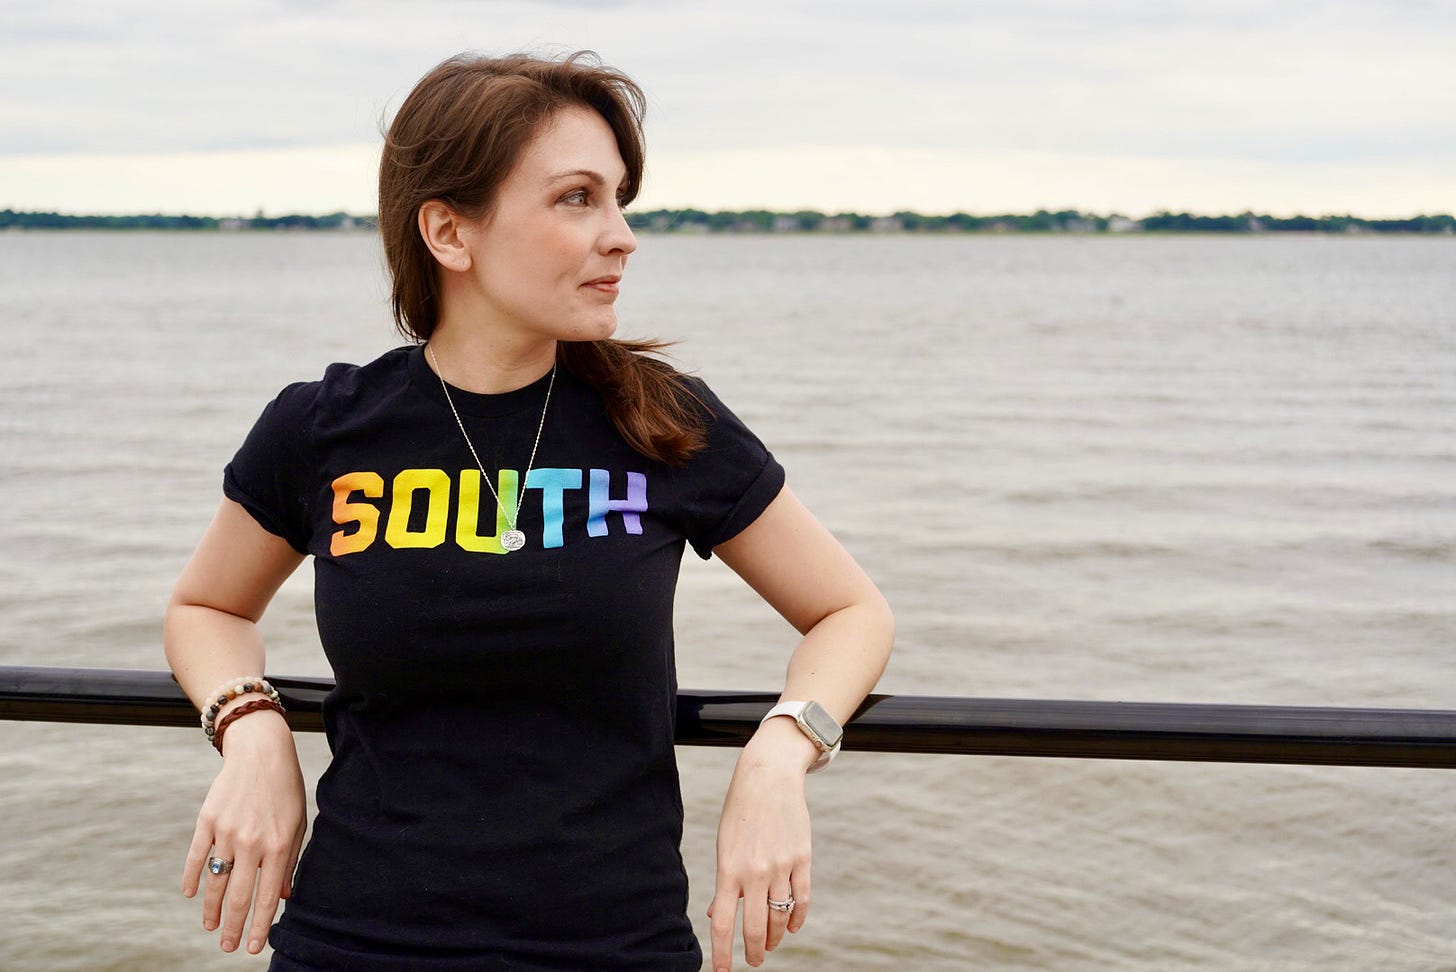 A photo of Kendra, a white woman with brunette hair wearing a black shirt with the word South across the front, standing in front of a vast body of water.